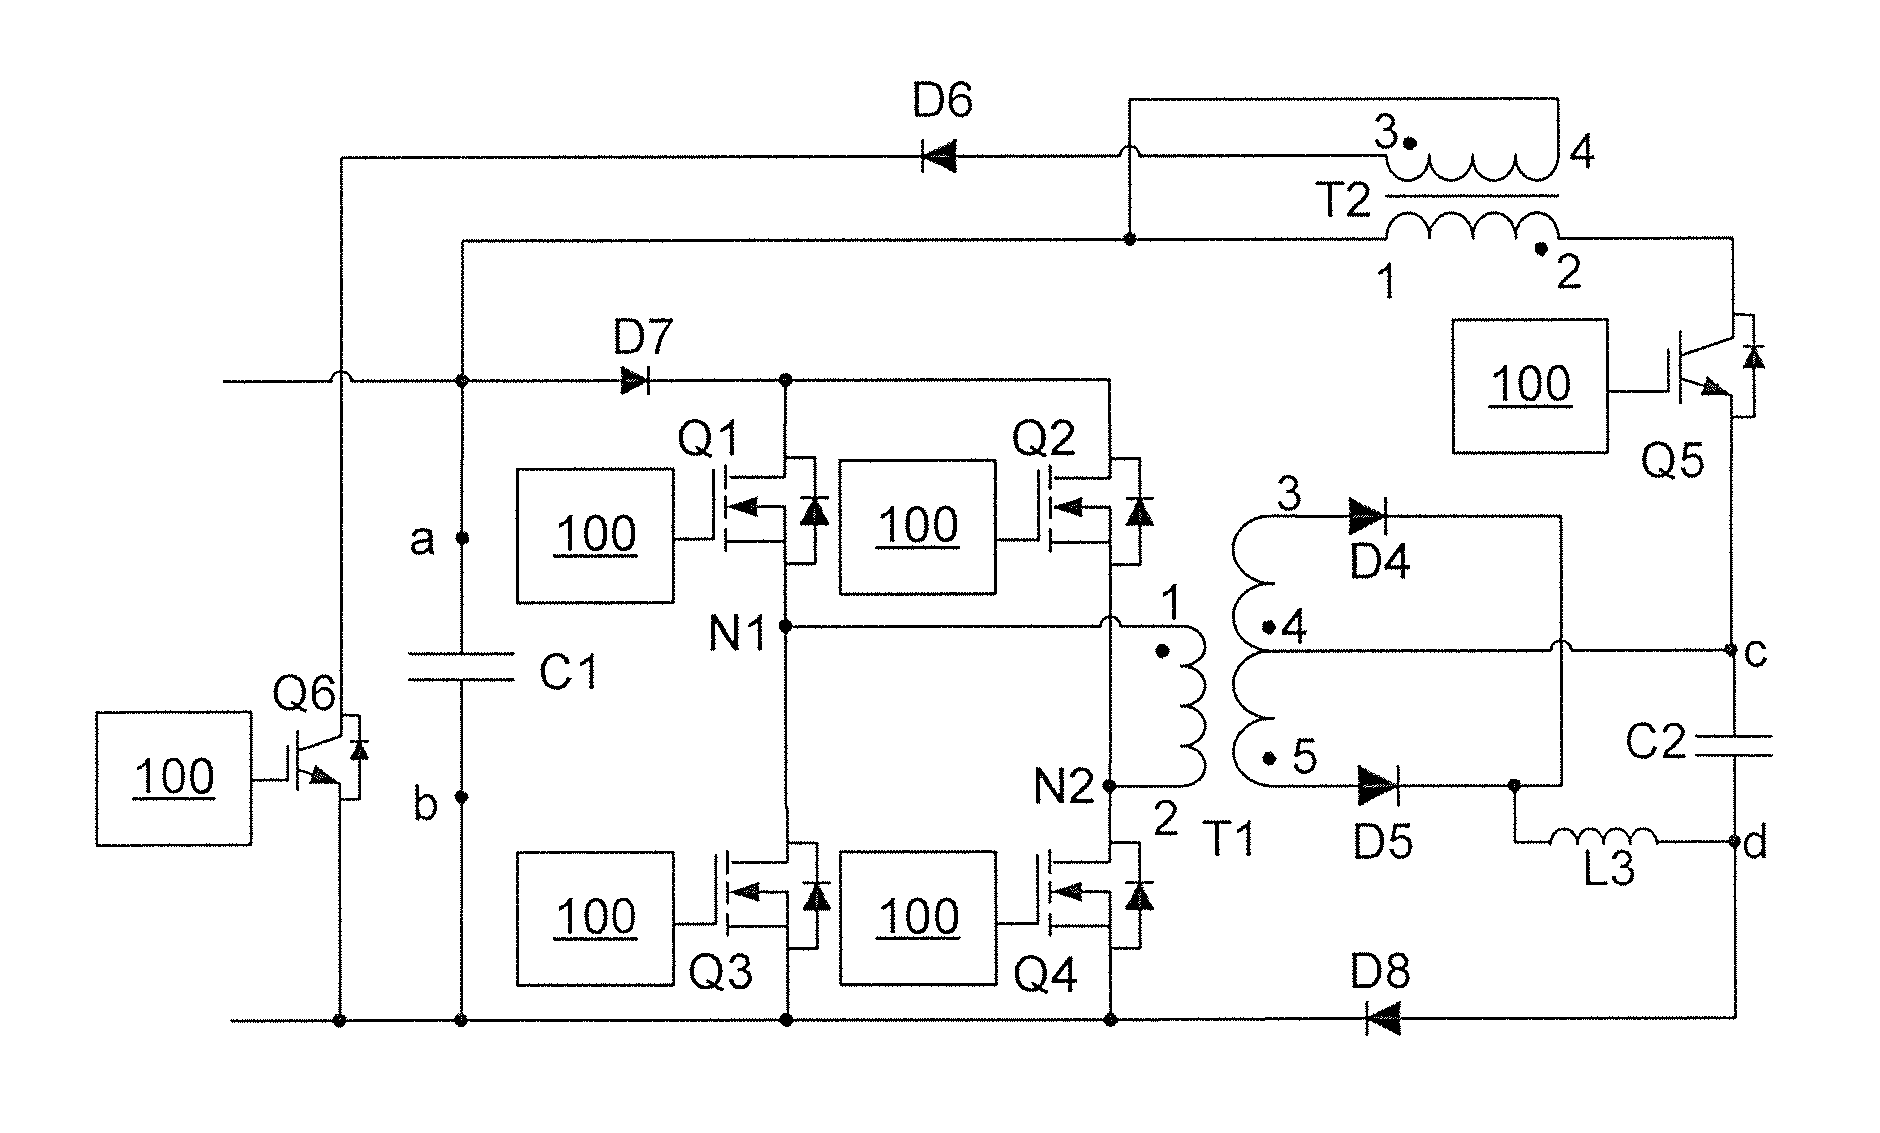 Battery heating circuits and methods using voltage inversion based on predetermined conditions